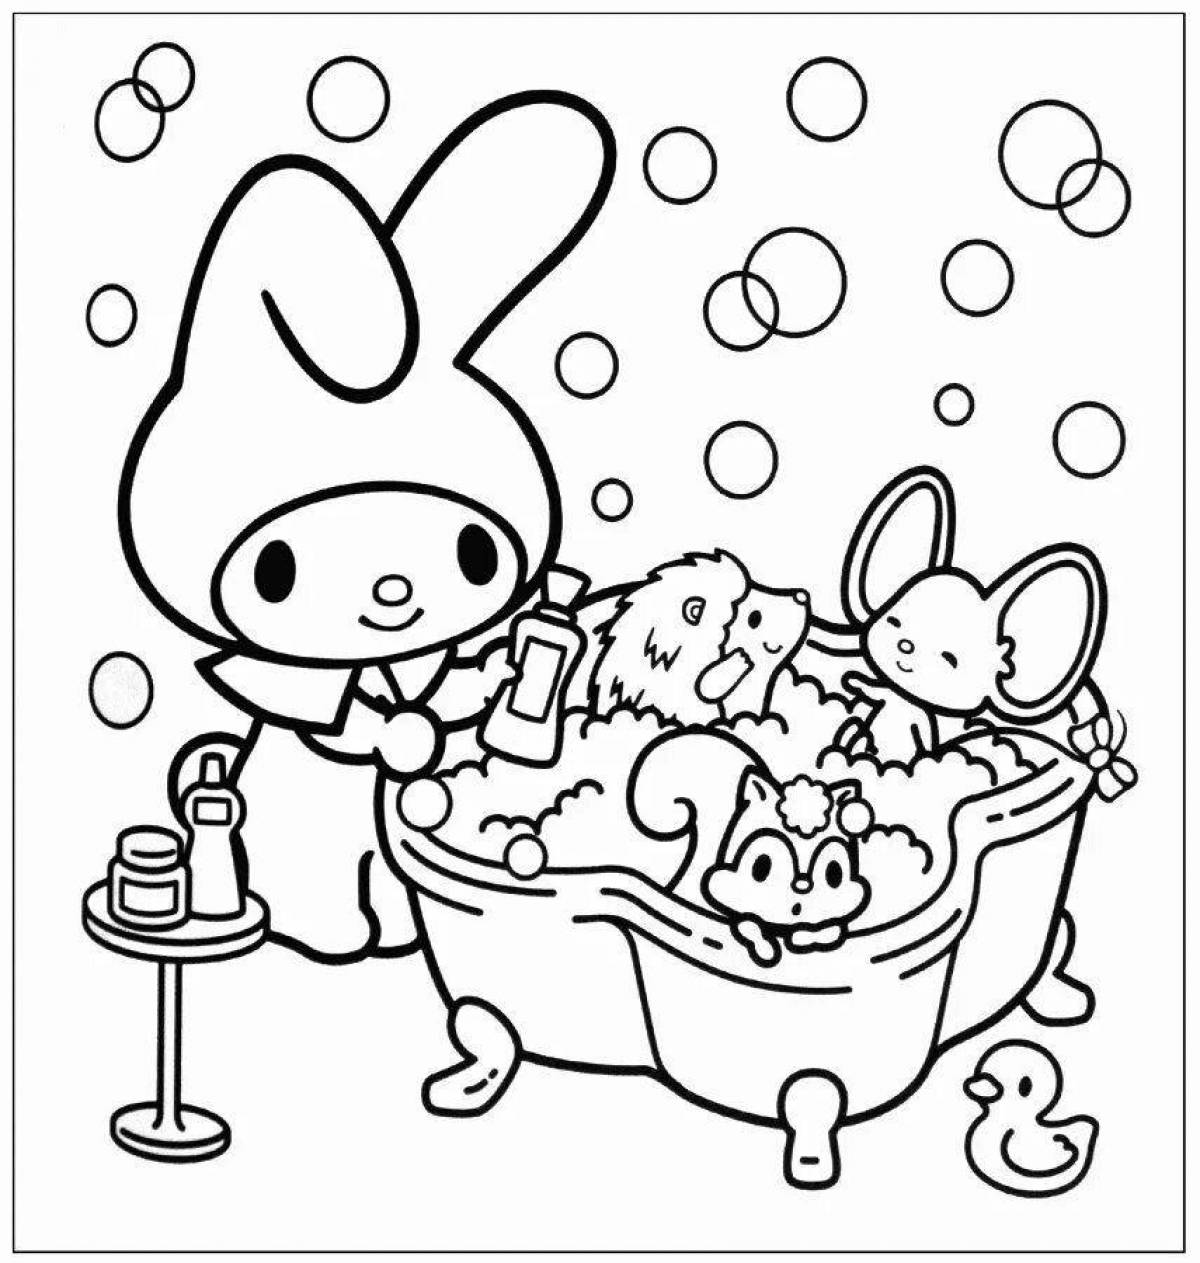 Ecstatic my melody coloring page